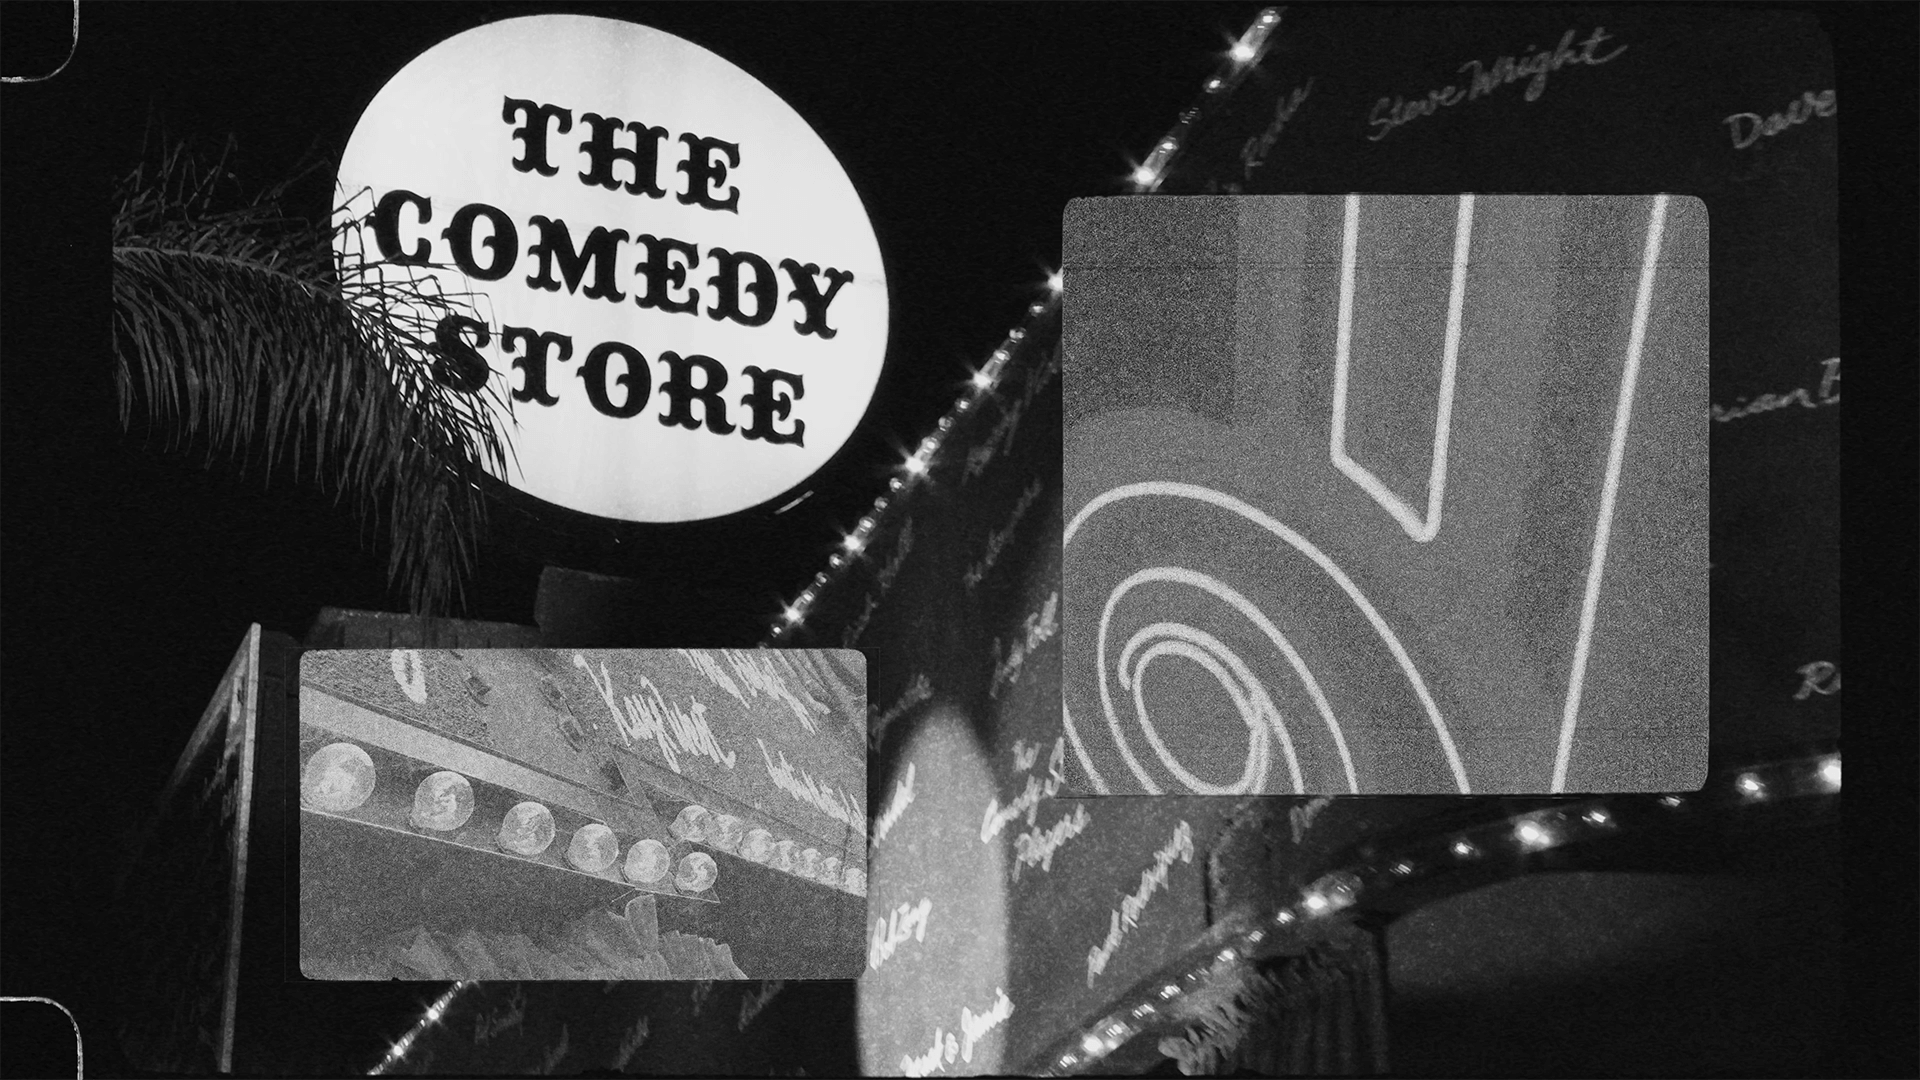 The exterior of The Comedy Store at night in black and white with distressed film overlays created by Todd Bishop